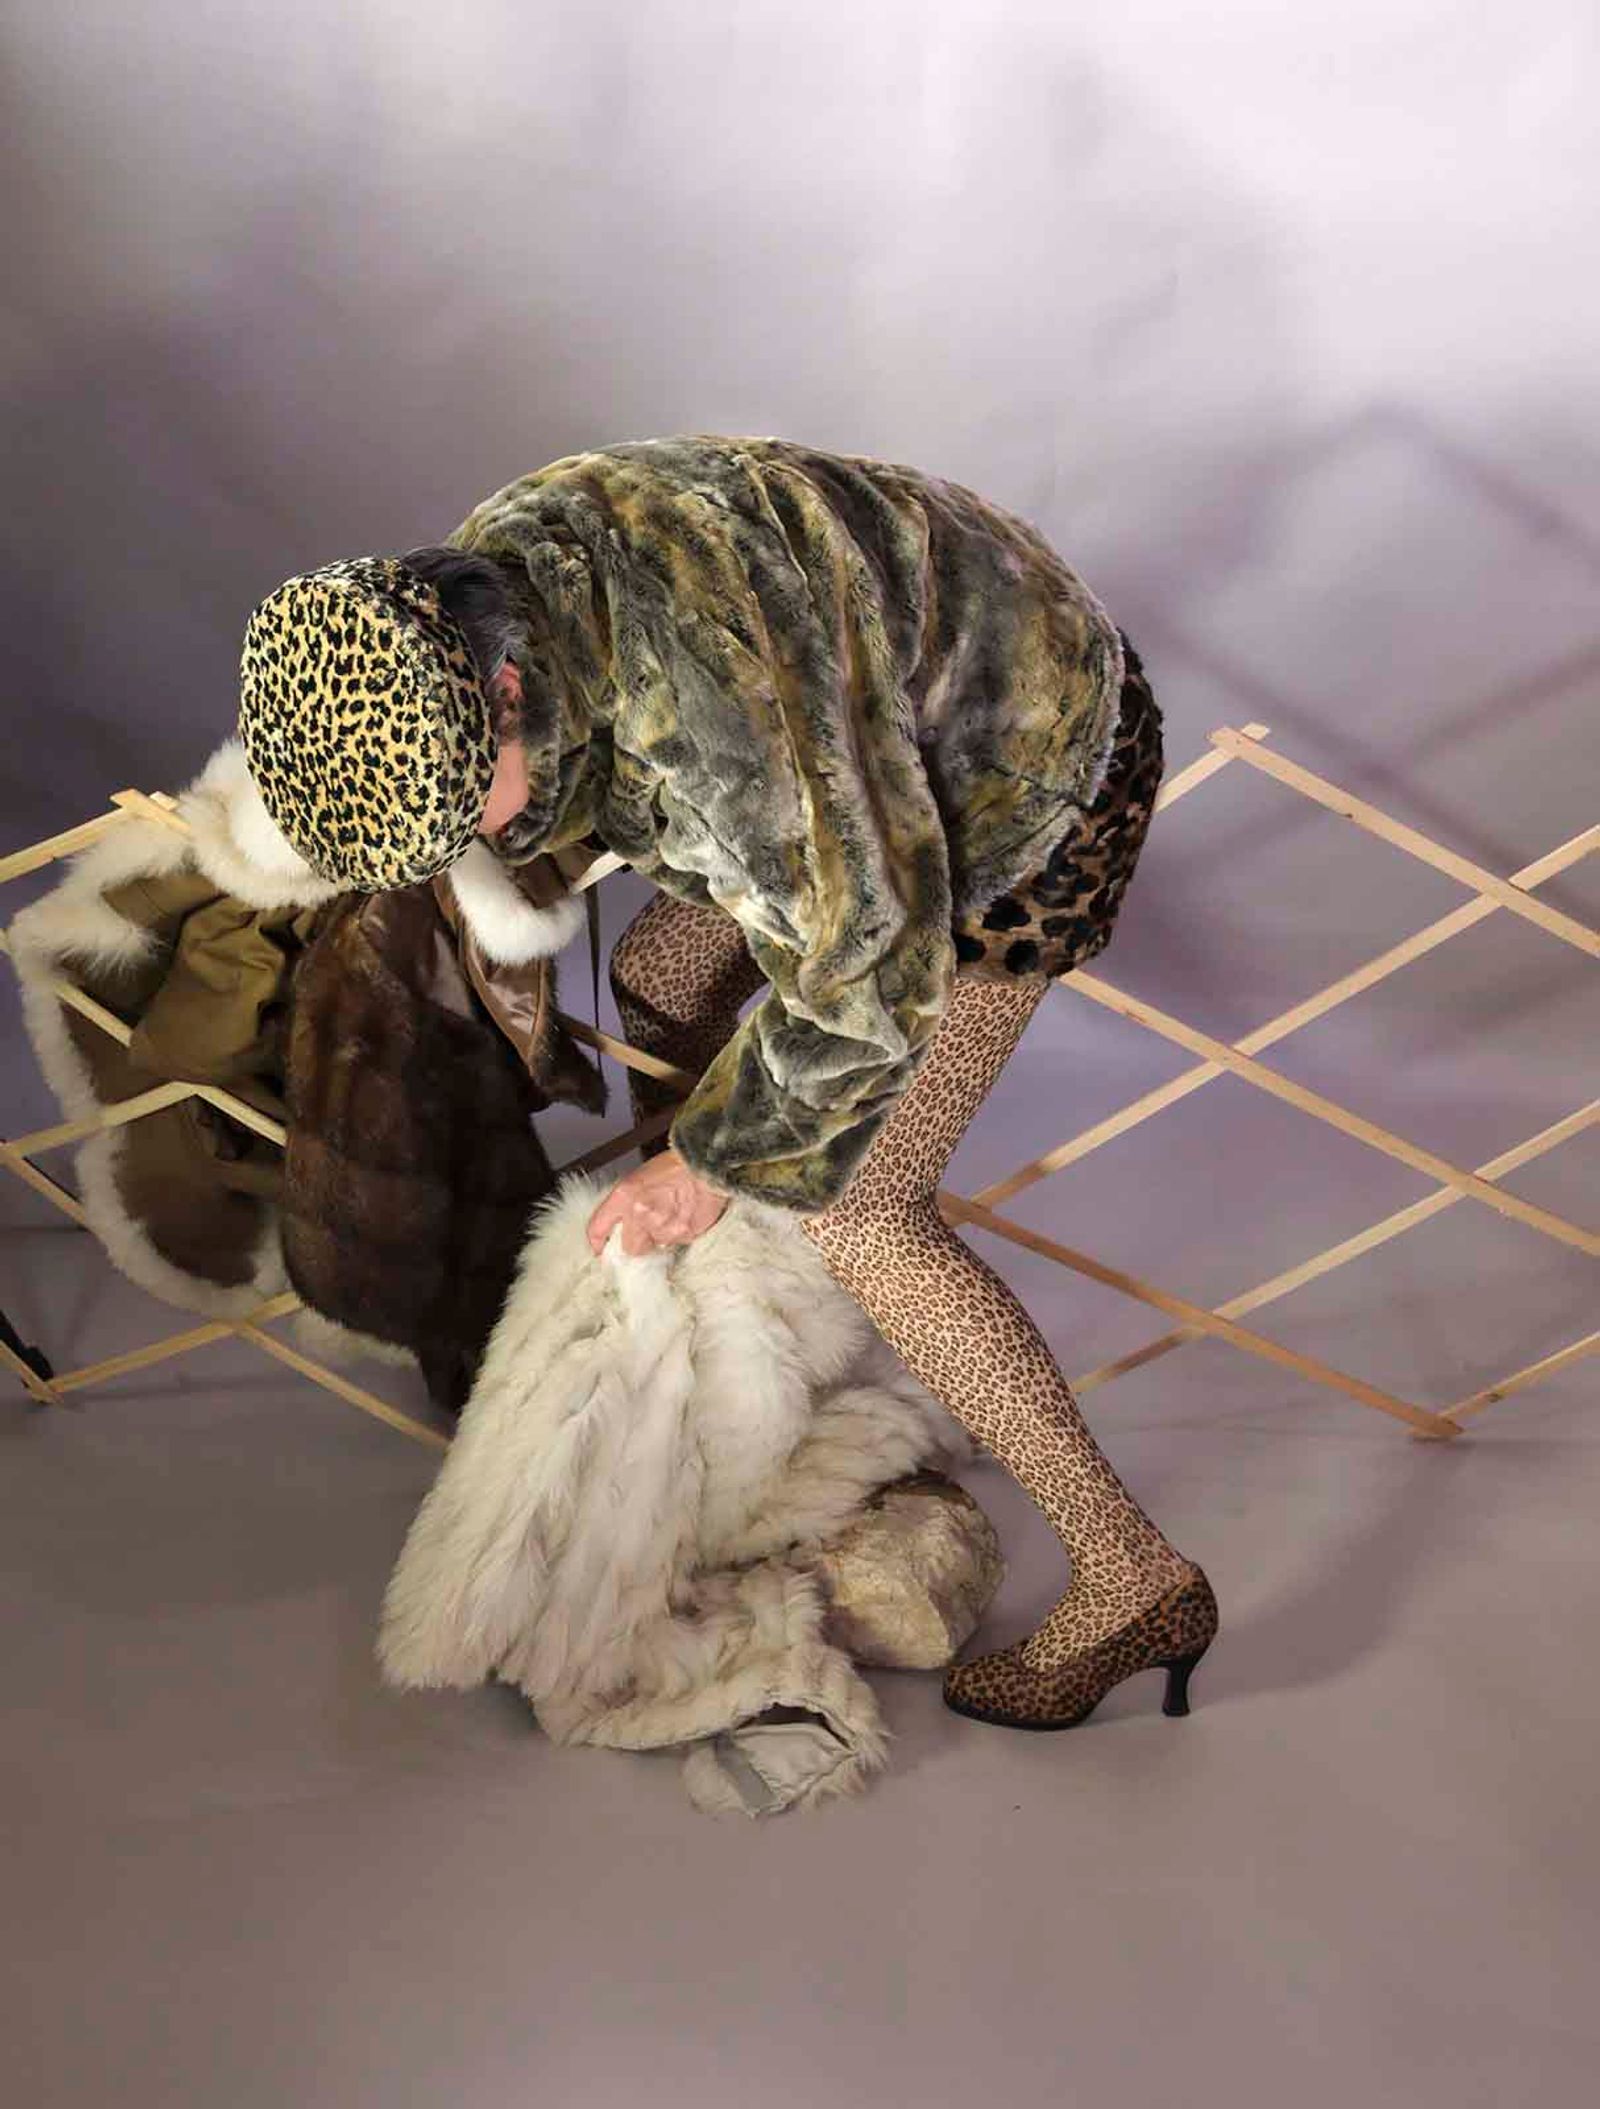 © Yvonne Steiger - Image from the Phtostory Women Wood and Fur photography project